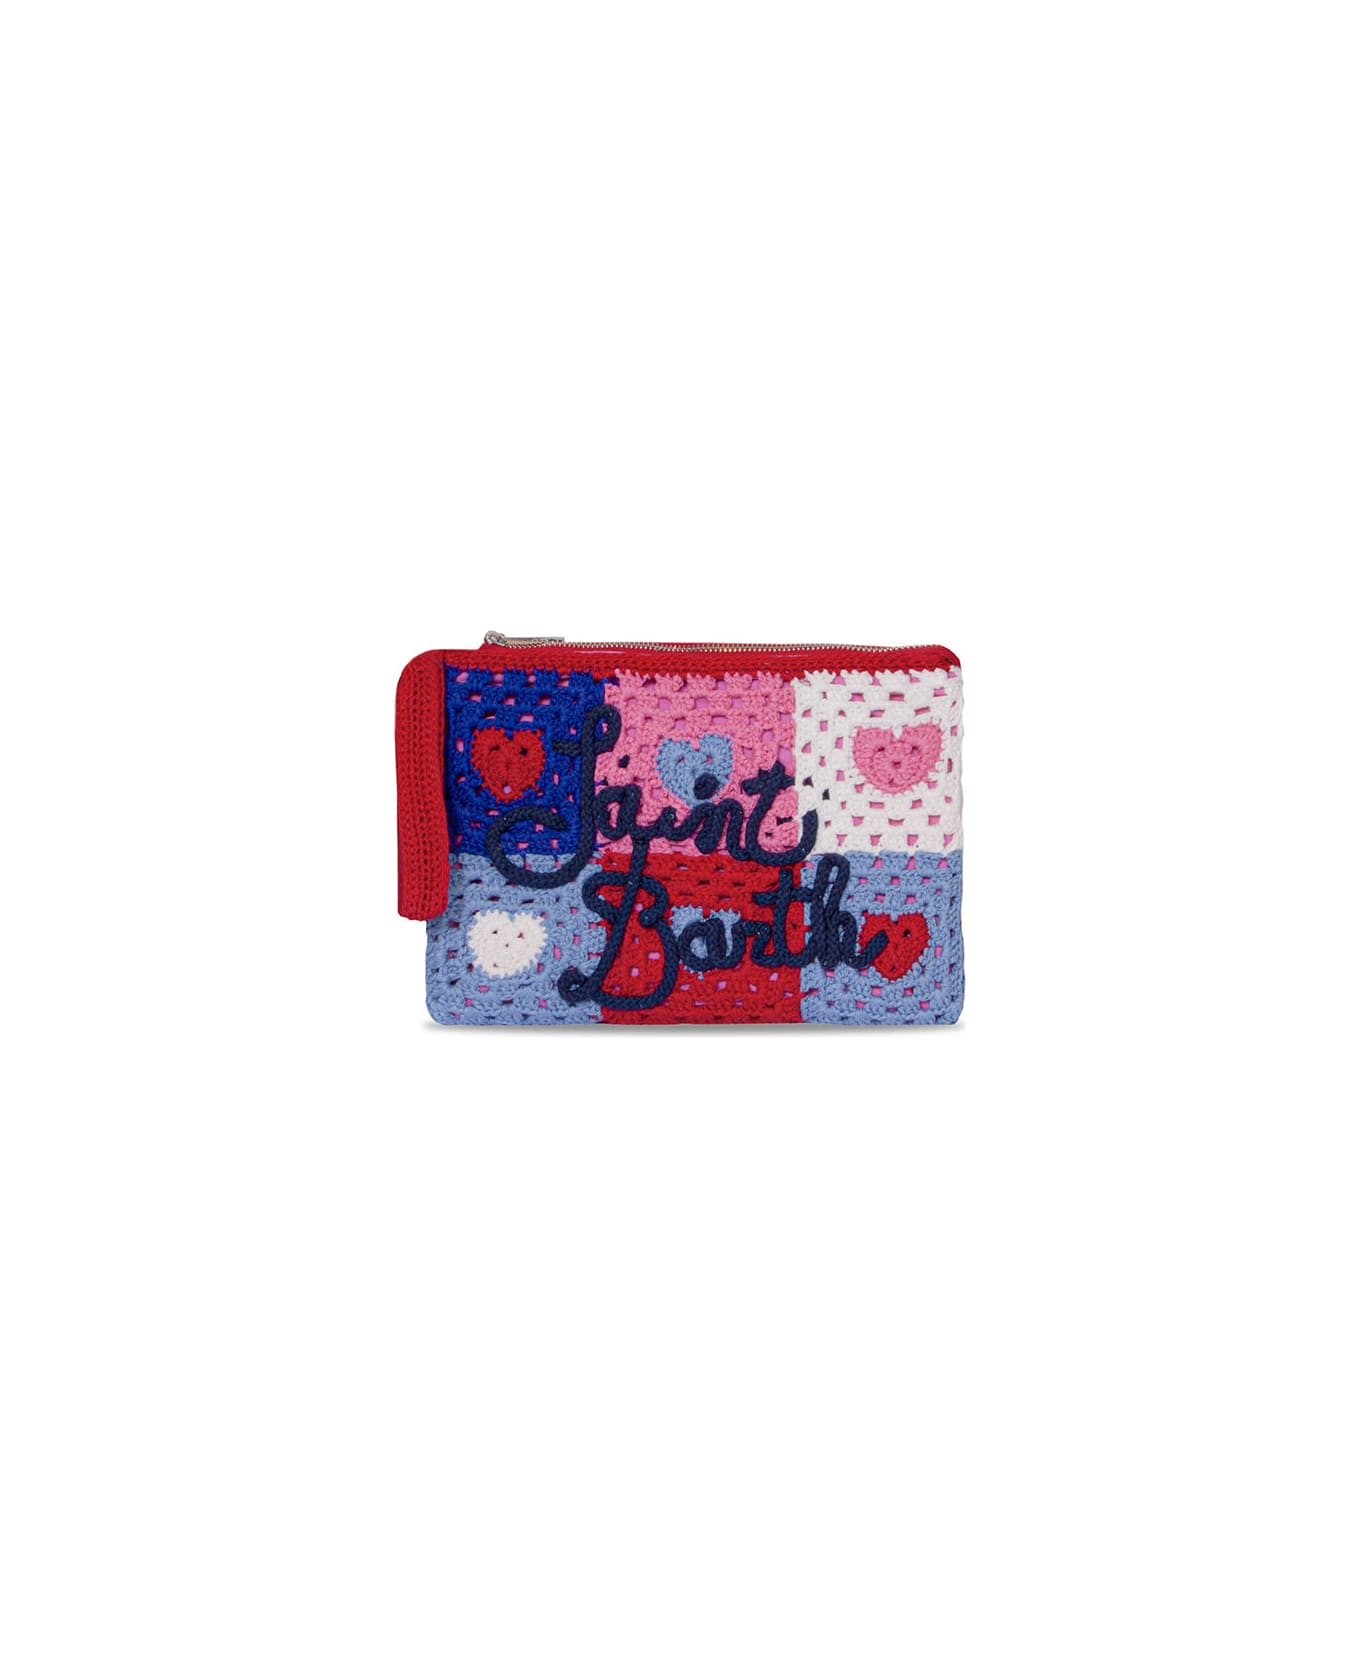 MC2 Saint Barth Parisienne Crochet Pouch Bag With Heart Embroidery - RED